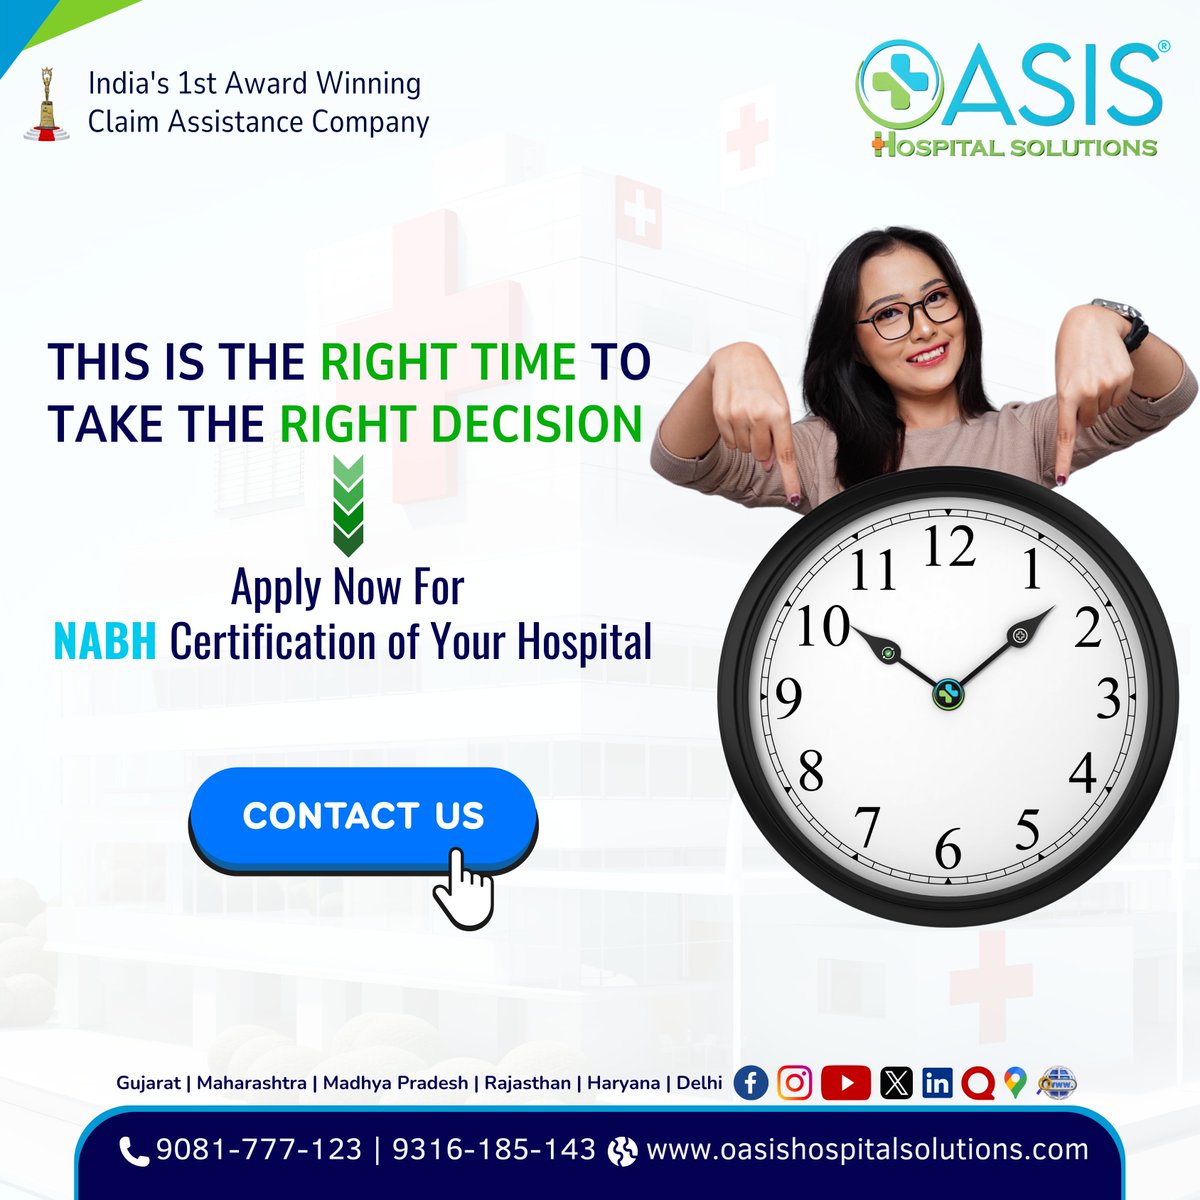 This is The Right Time to Take the Right Decision.

Apply Now For NABH Certification of Your Hospital

🔰🔰🔰🔰🔰
For More Information:
📞 Call Now: 9081-777-123 / 9316-185-143
🌐 Website: oasishospitalsolutions.com